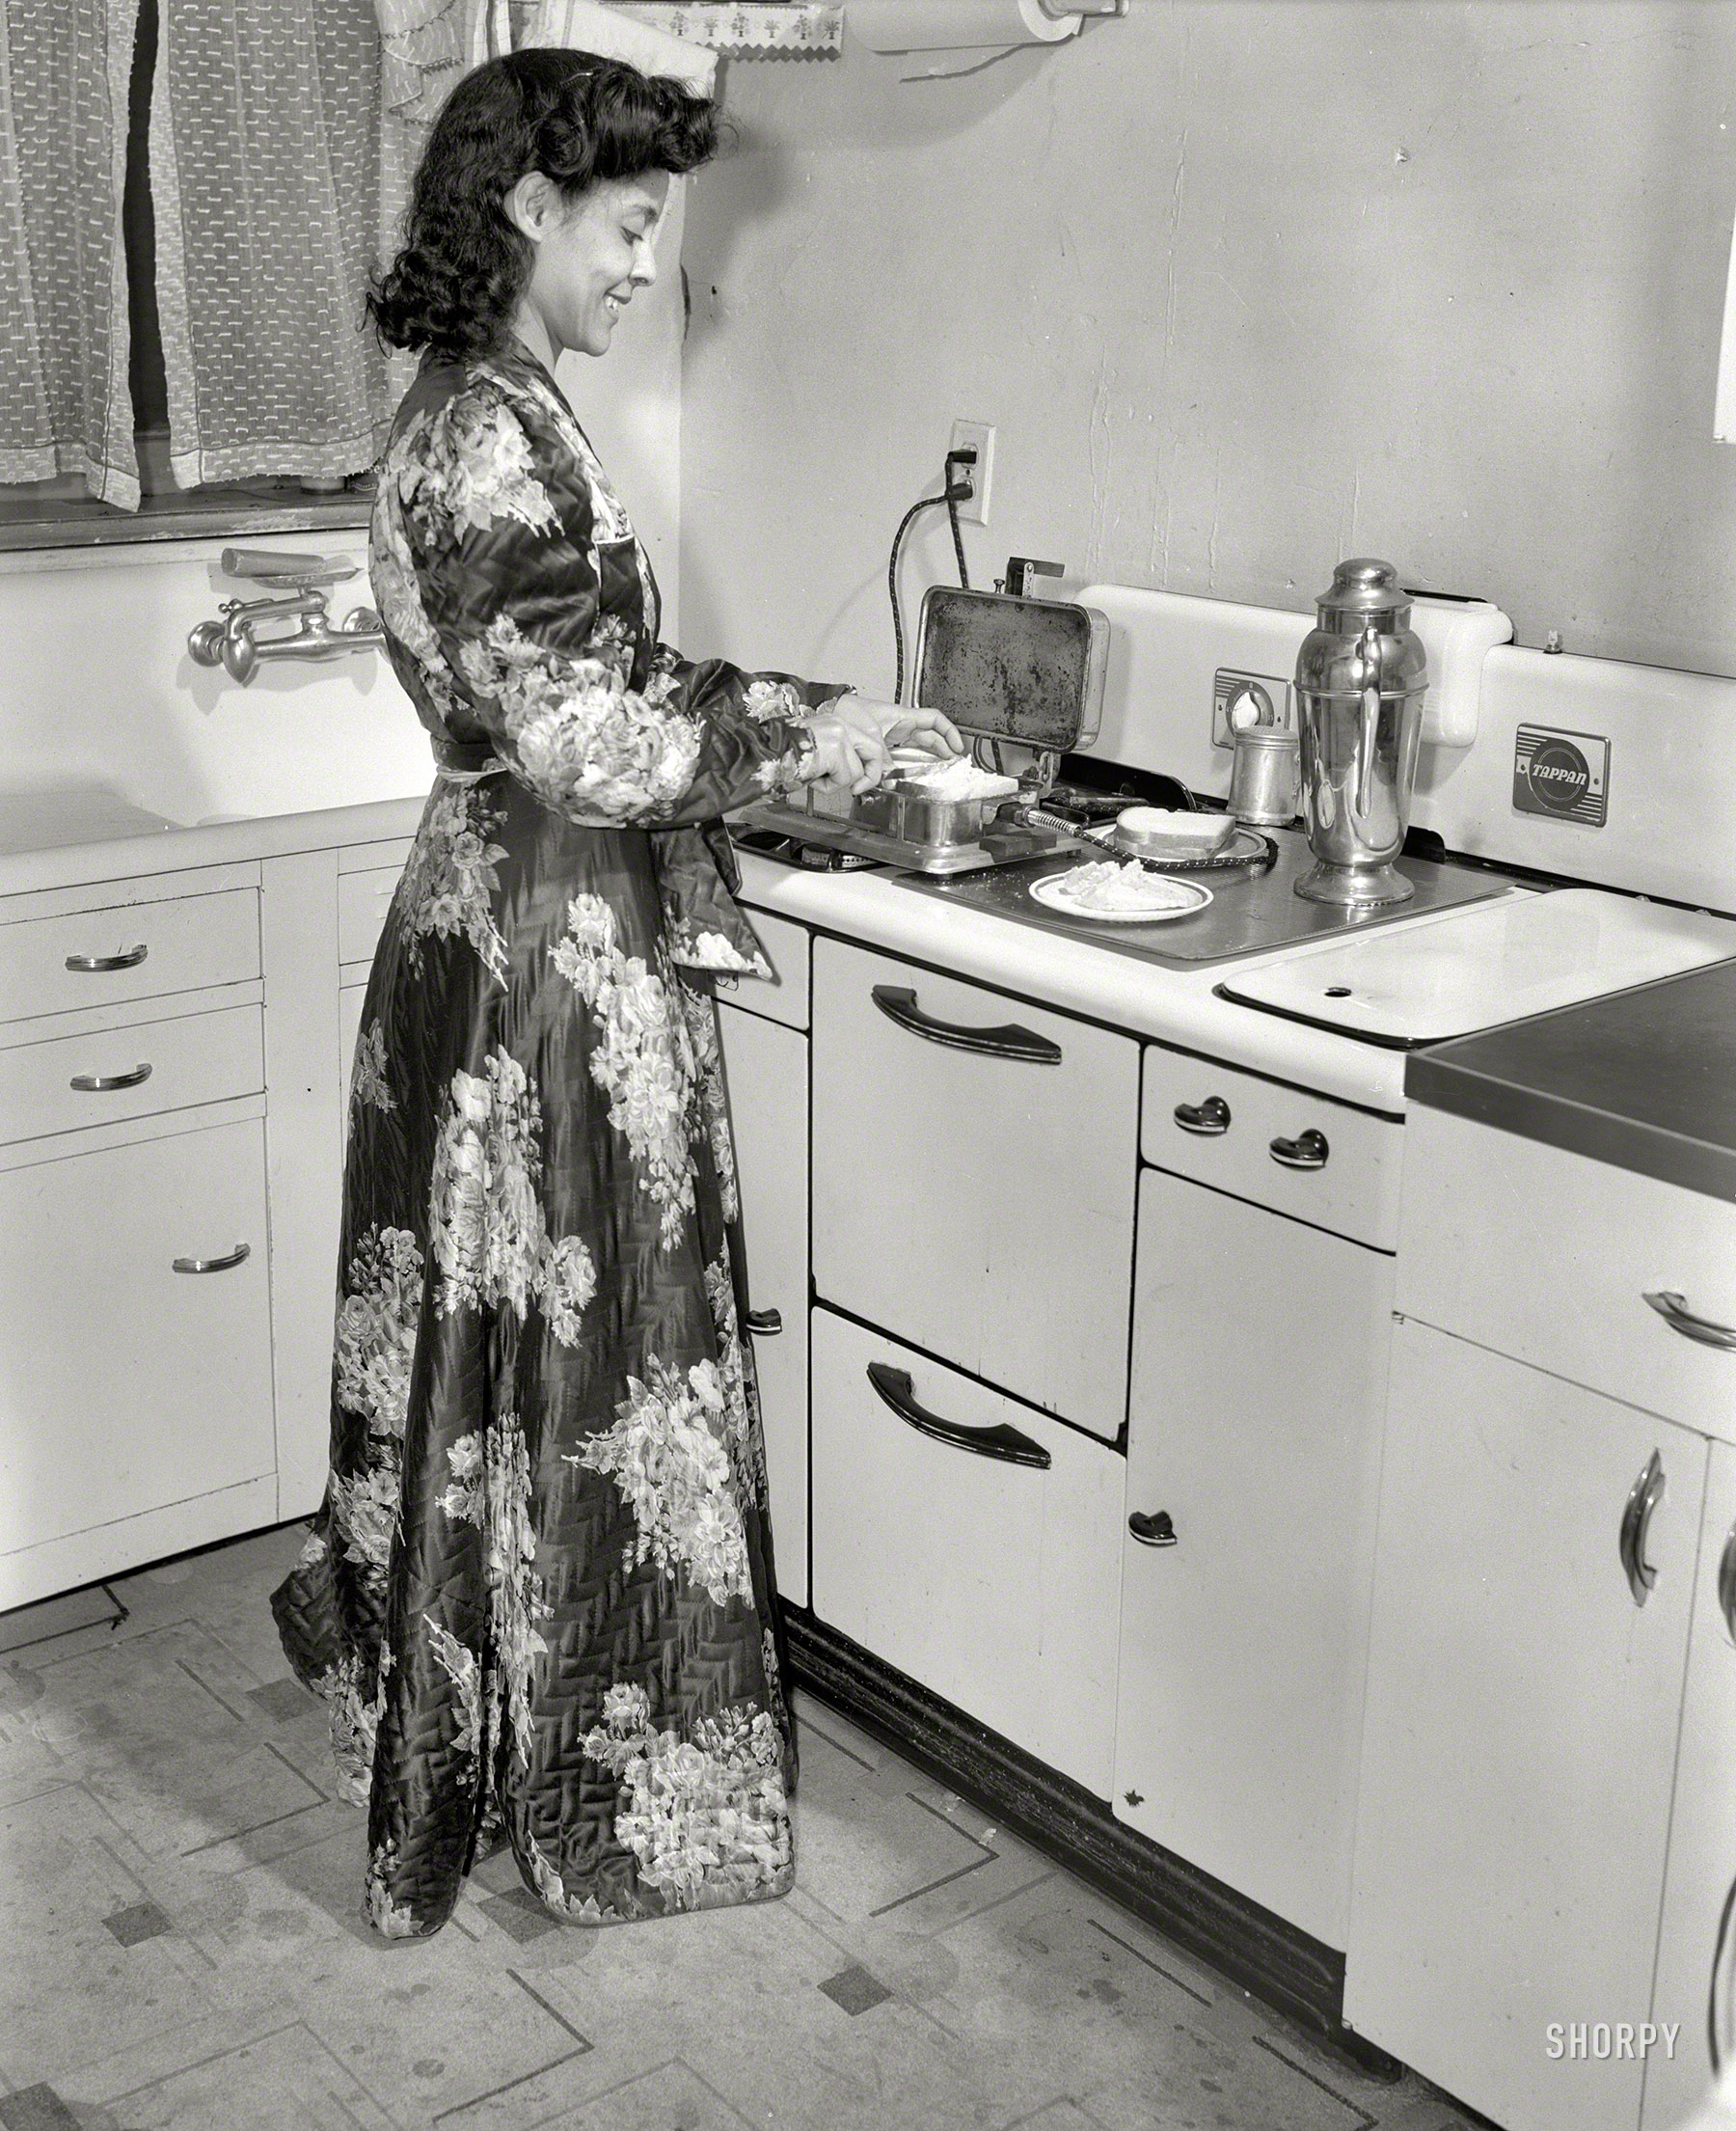 Winter 1942. Washington, D.C. "Jewel Mazique, worker at the Library of Congress, getting a late snack." Hey, we'll have some of that. Large format nitrate negative by John Collier for the Office of War Information. View full size.